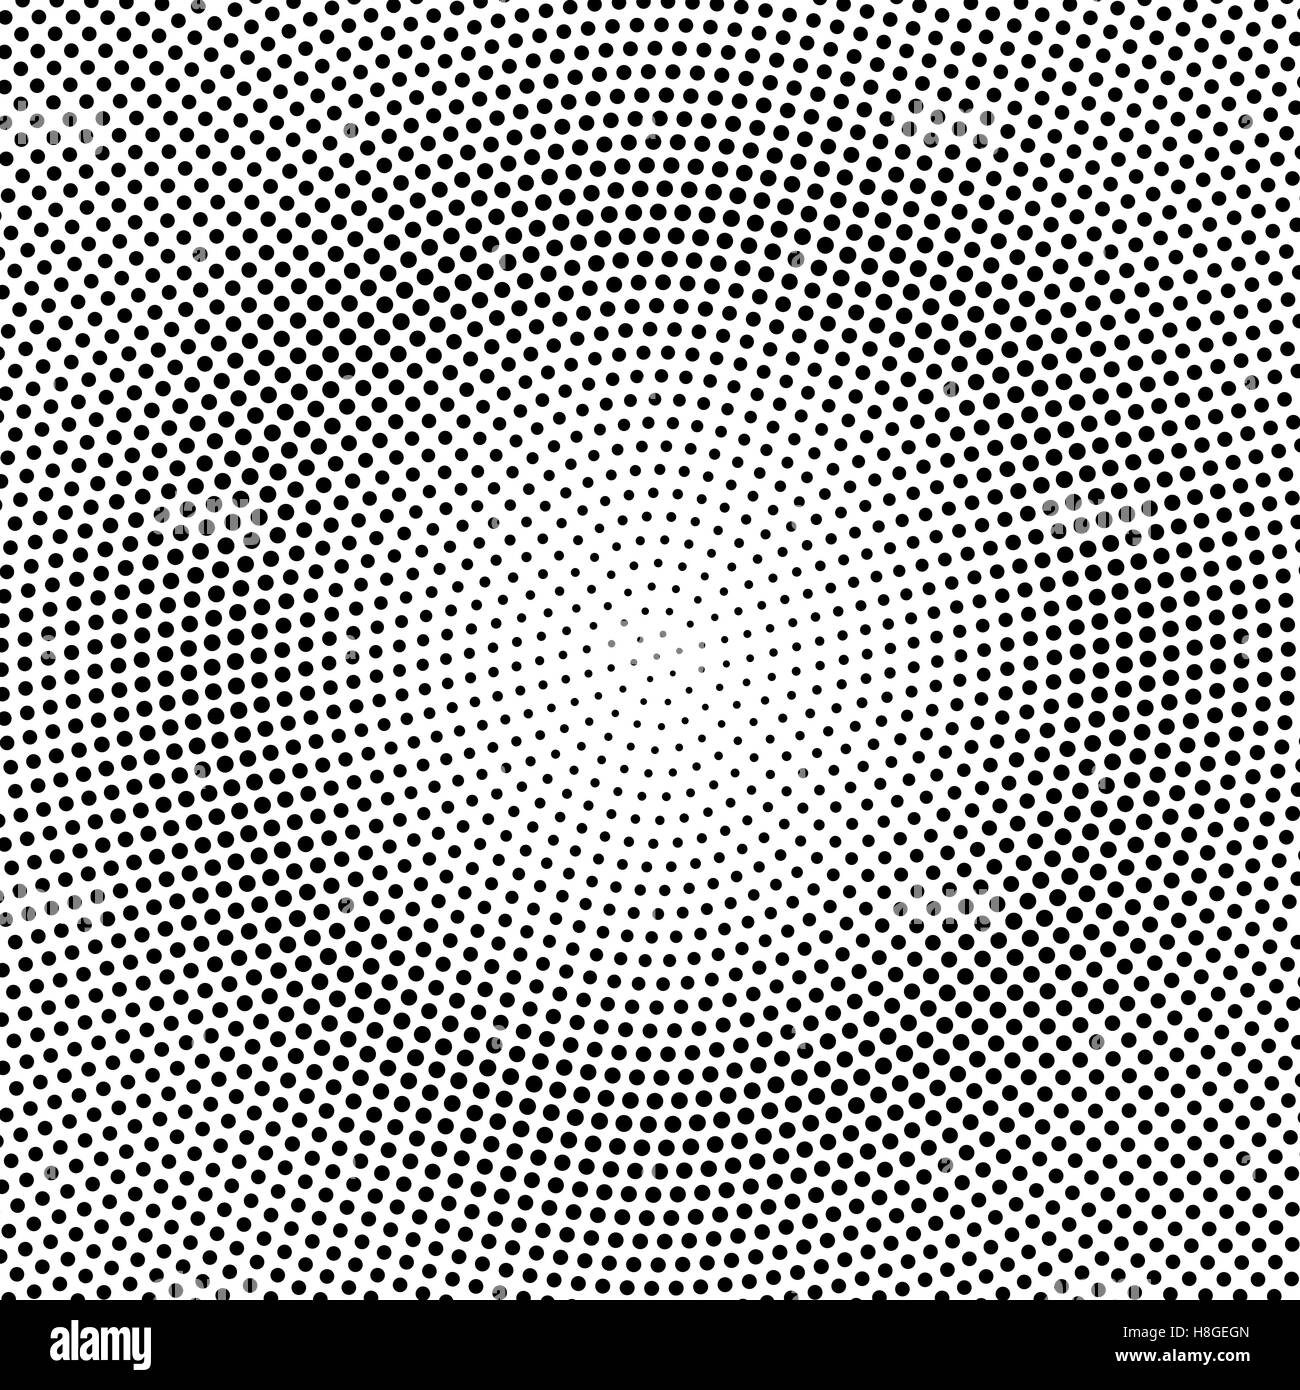 Abstract Dotted Radial Halftone Background Vector Backdrop From Dots